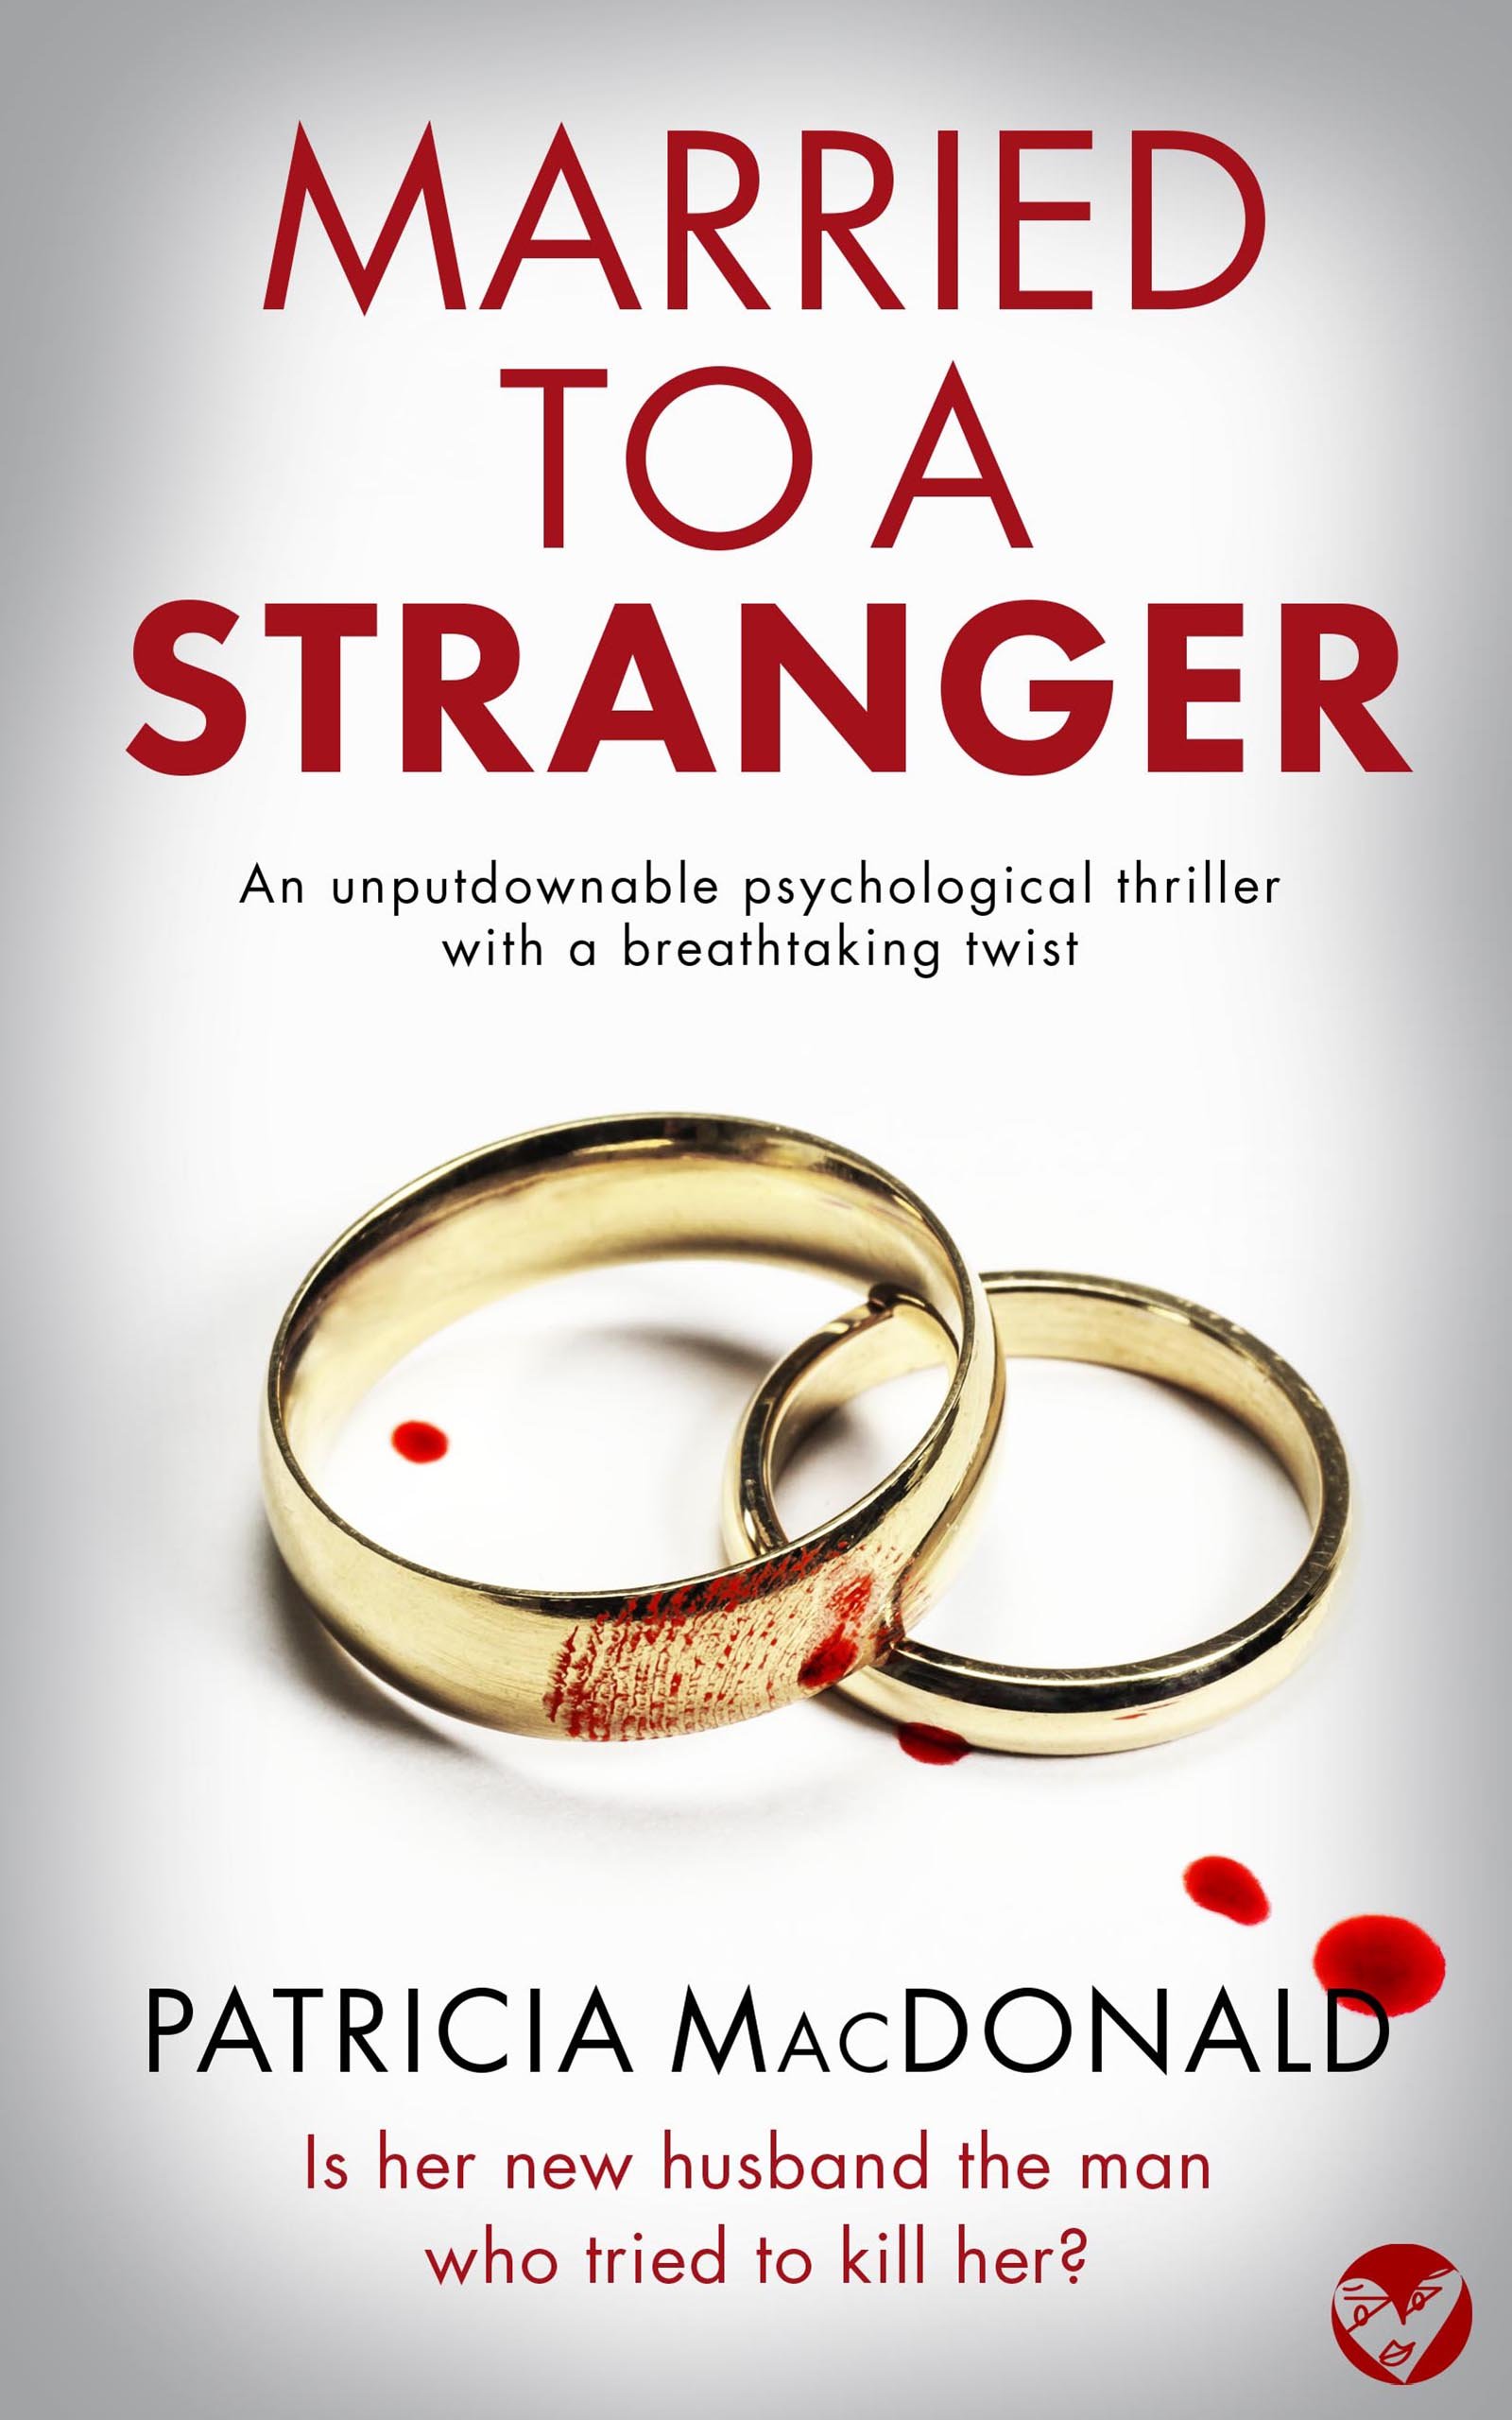 MARRIED TO A STRANGER Cover publish (1).jpg